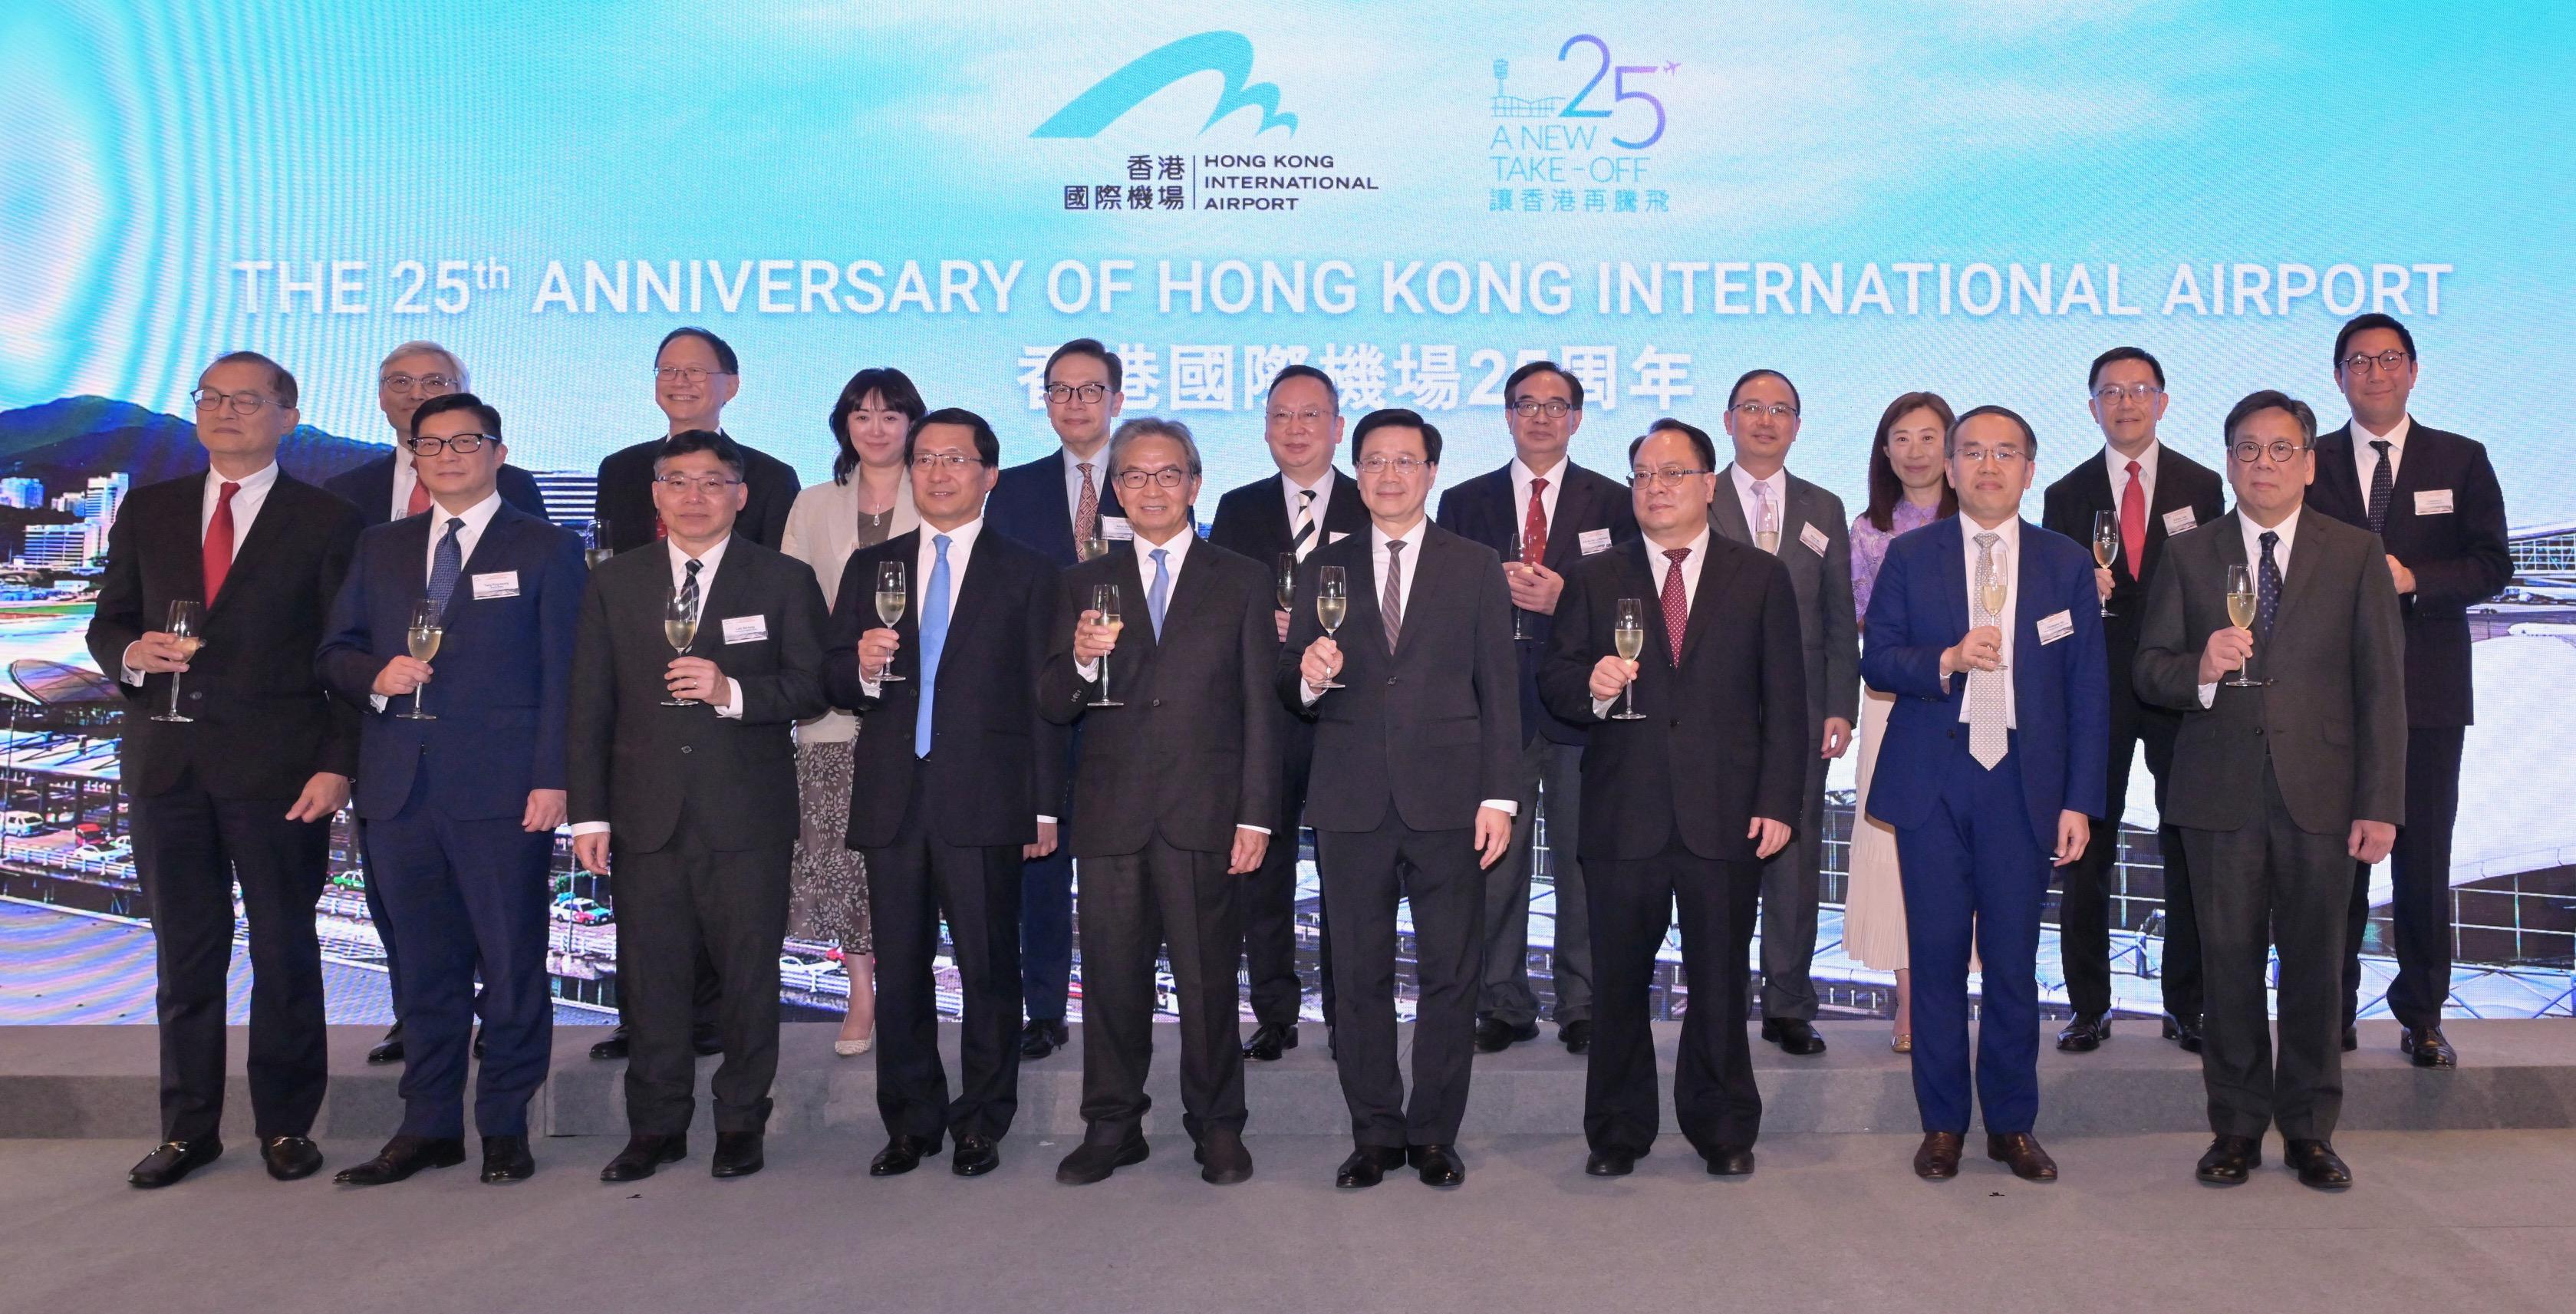 The Chief Executive, Mr John Lee, attended the cocktail reception in celebration of the 25th anniversary of Hong Kong International Airport today (July 10). Photo shows Mr Lee (front row, fourth right); Deputy Commissioner of the Office of the Commissioner of the Ministry of Foreign Affairs of the People's Republic of China in the Hong Kong Special Administrative Region Mr Pan Yundong (front row, third right); the Chairman of the Airport Authority Hong Kong (AAHK), Mr Jack So (front row, fifth left); the Chief Executive Officer of the AAHK, Mr Fred Lam (front row, fourth left), and other guests at the reception.
